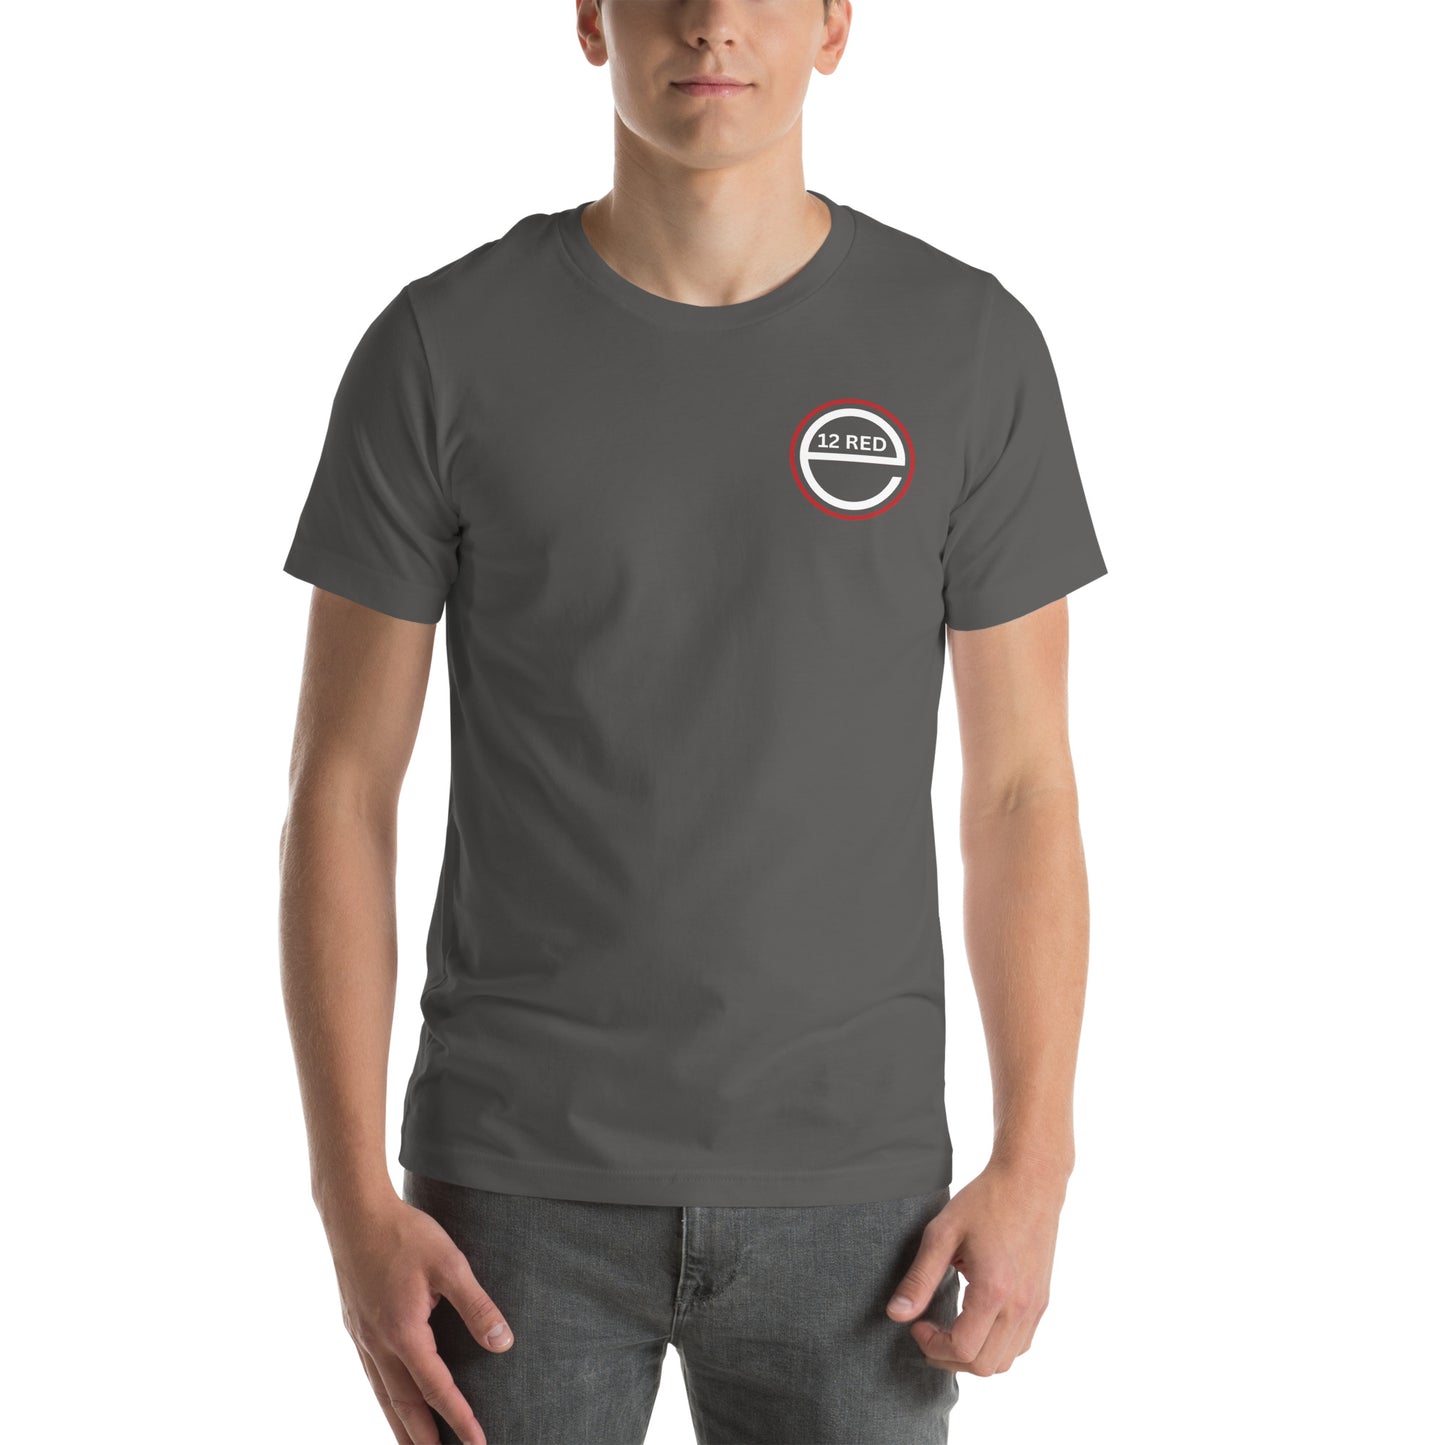 Excel 12 Red - Nationals - Unisex t-shirt